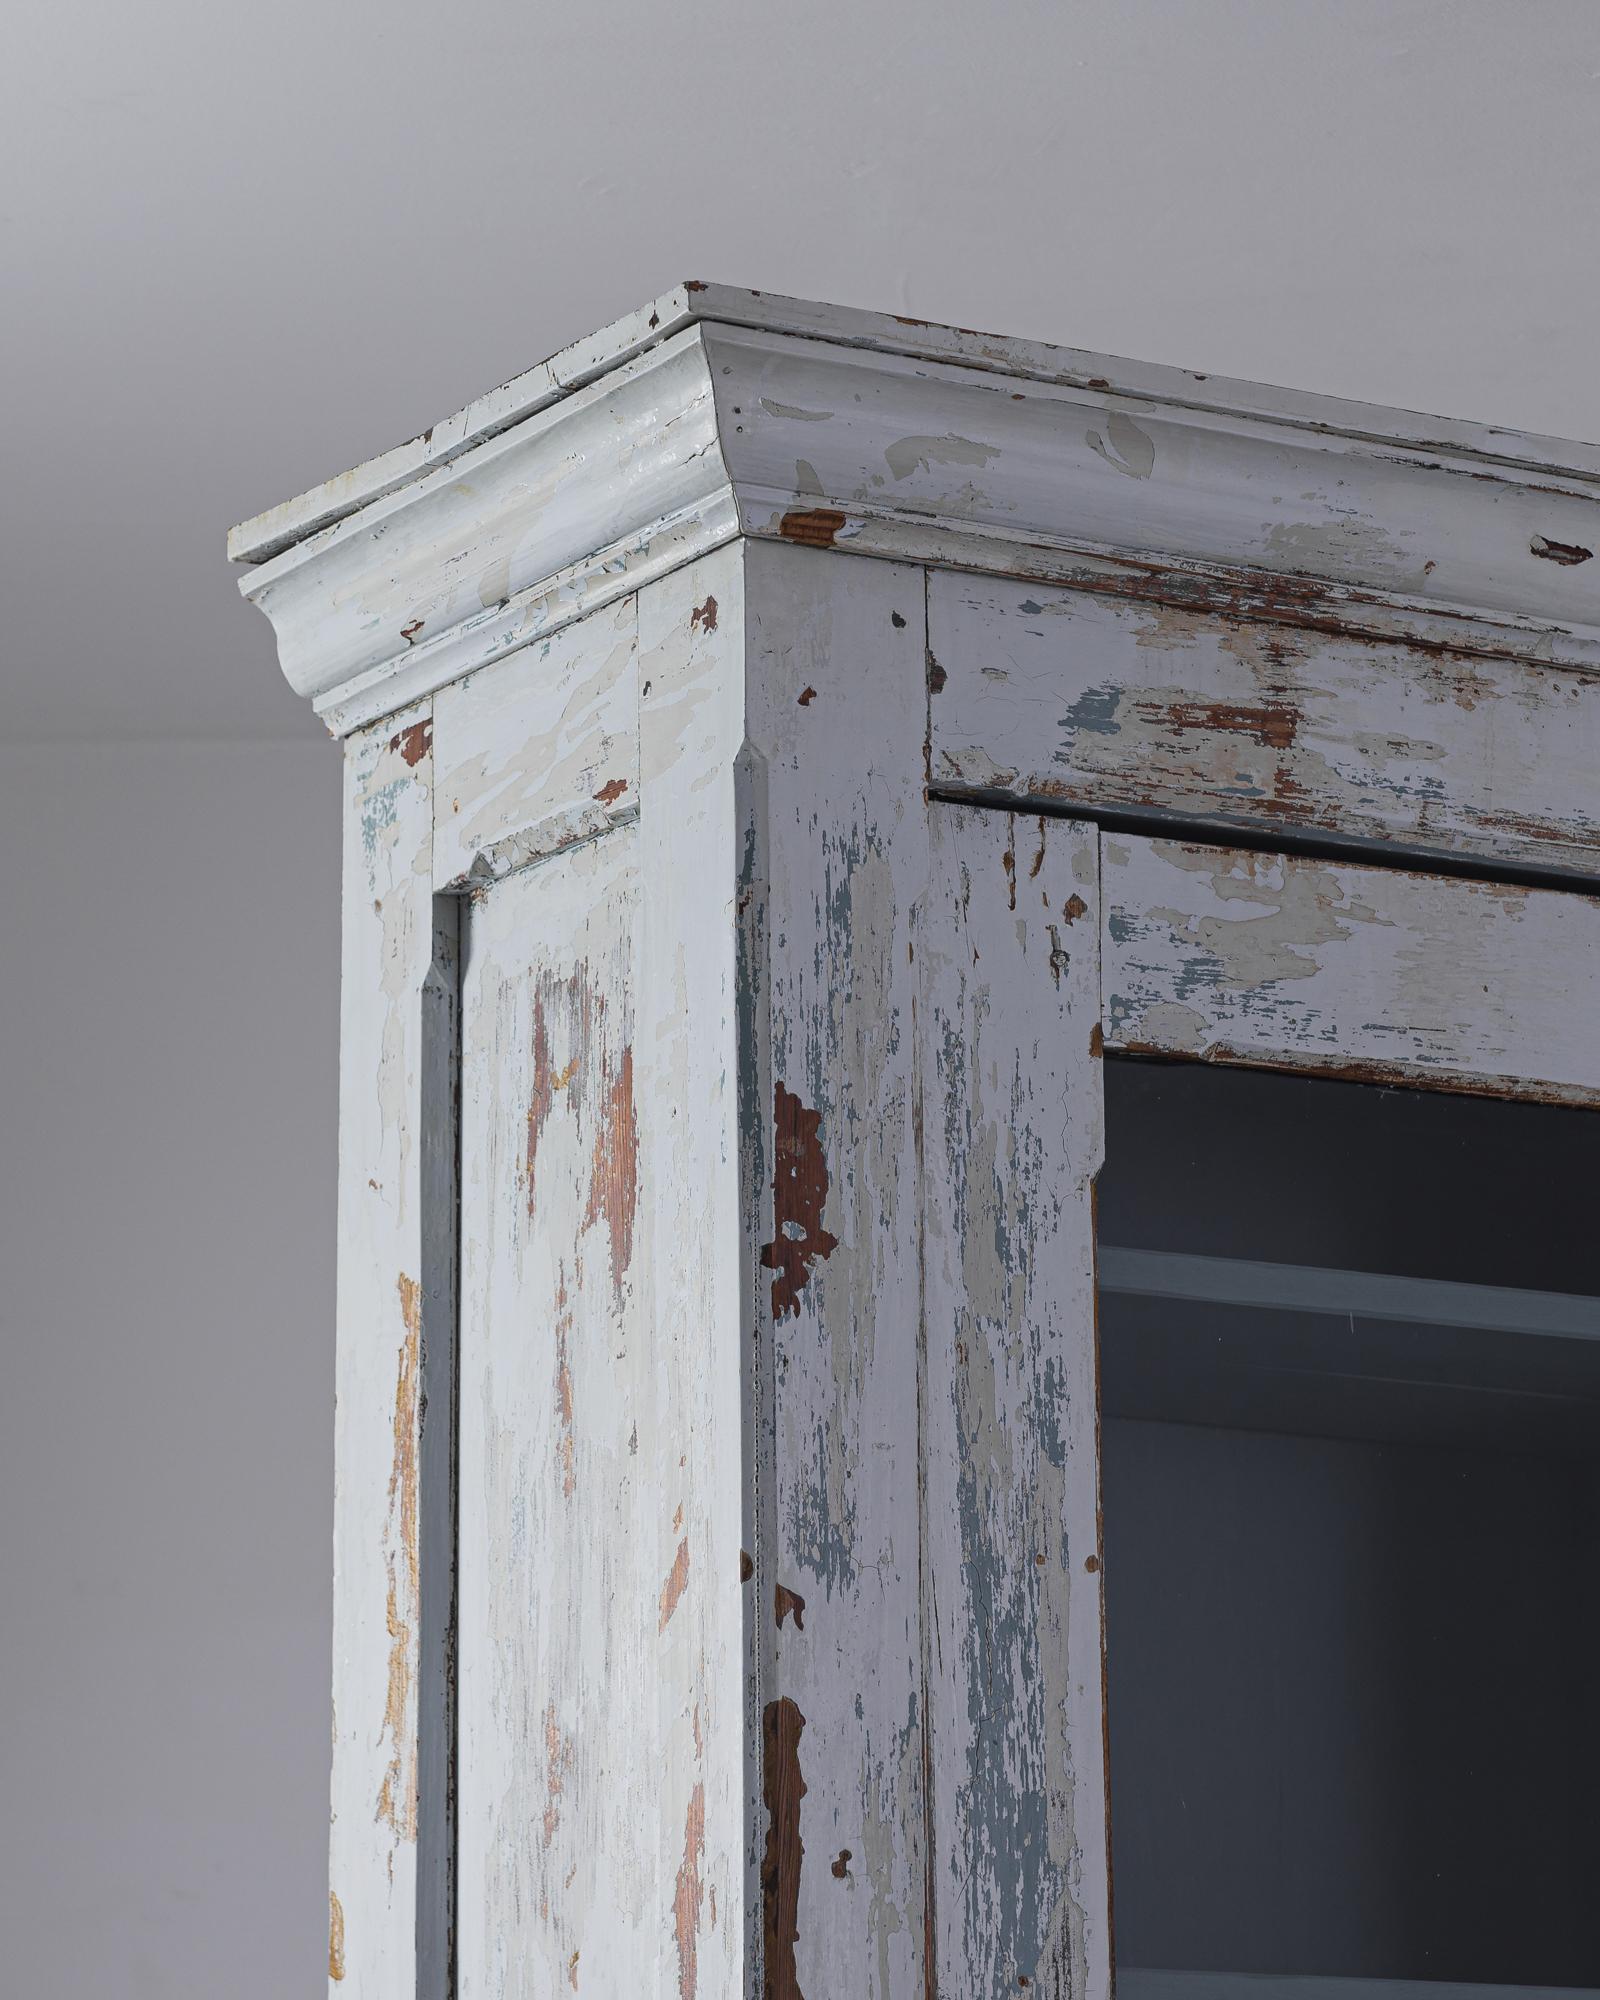 A wooden vitrine from 1910s Belgium with an evocative patina. A tall, slender cabinet, fronted by a paned glass door, sits atop a low cupboard. The original periwinkle paint has weathered to reveal notes of pigeon-grey, teal, and natural wood; a